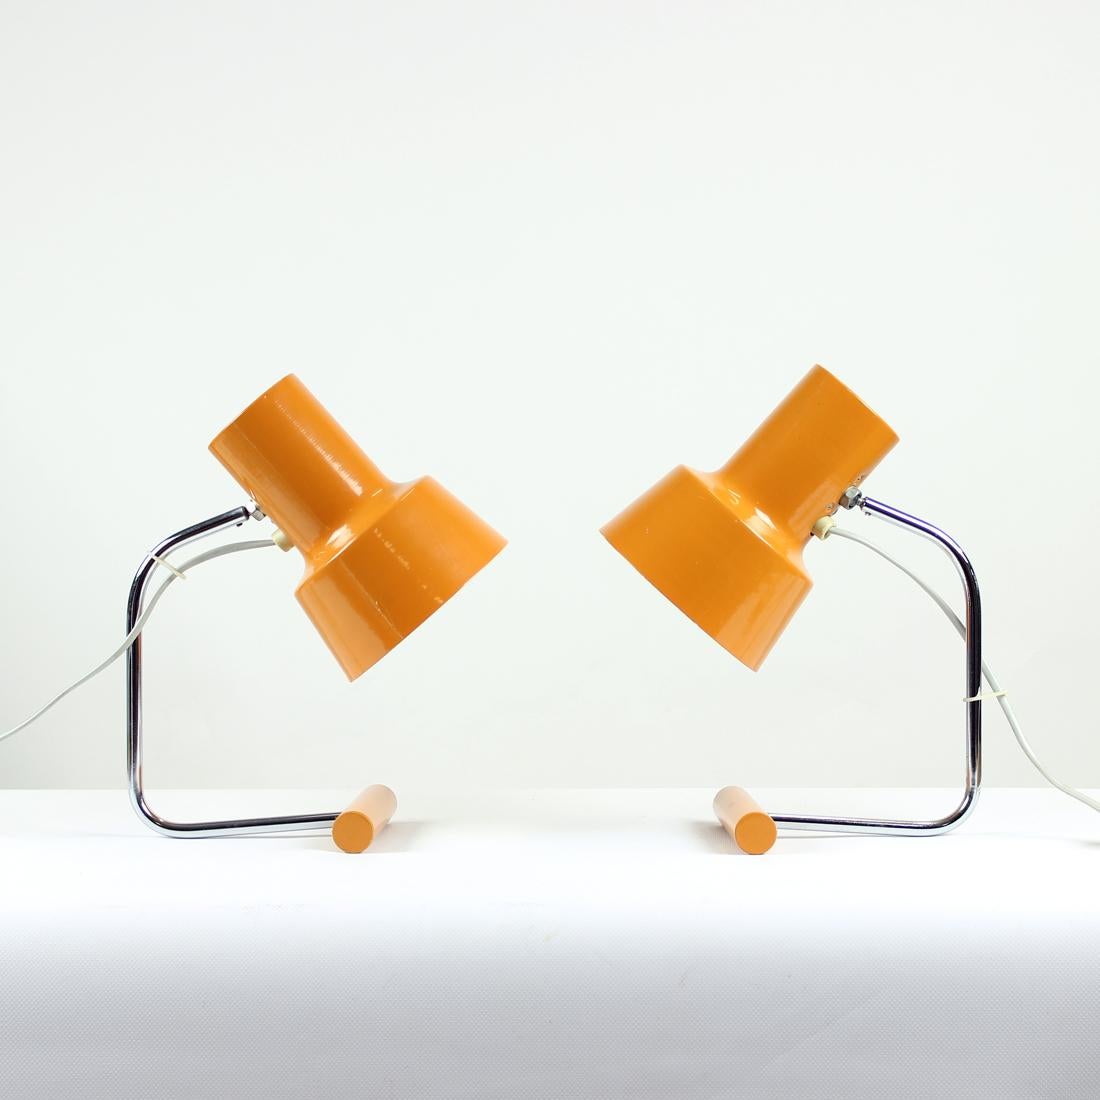 Set of two beautiful table lamps by Lidokov company, designed by Josef Hurka. Produced in 1960s, the lamps are iconic work of the designer. The chrome construction connects the metal base and shield in orange color. The lamps are in original color